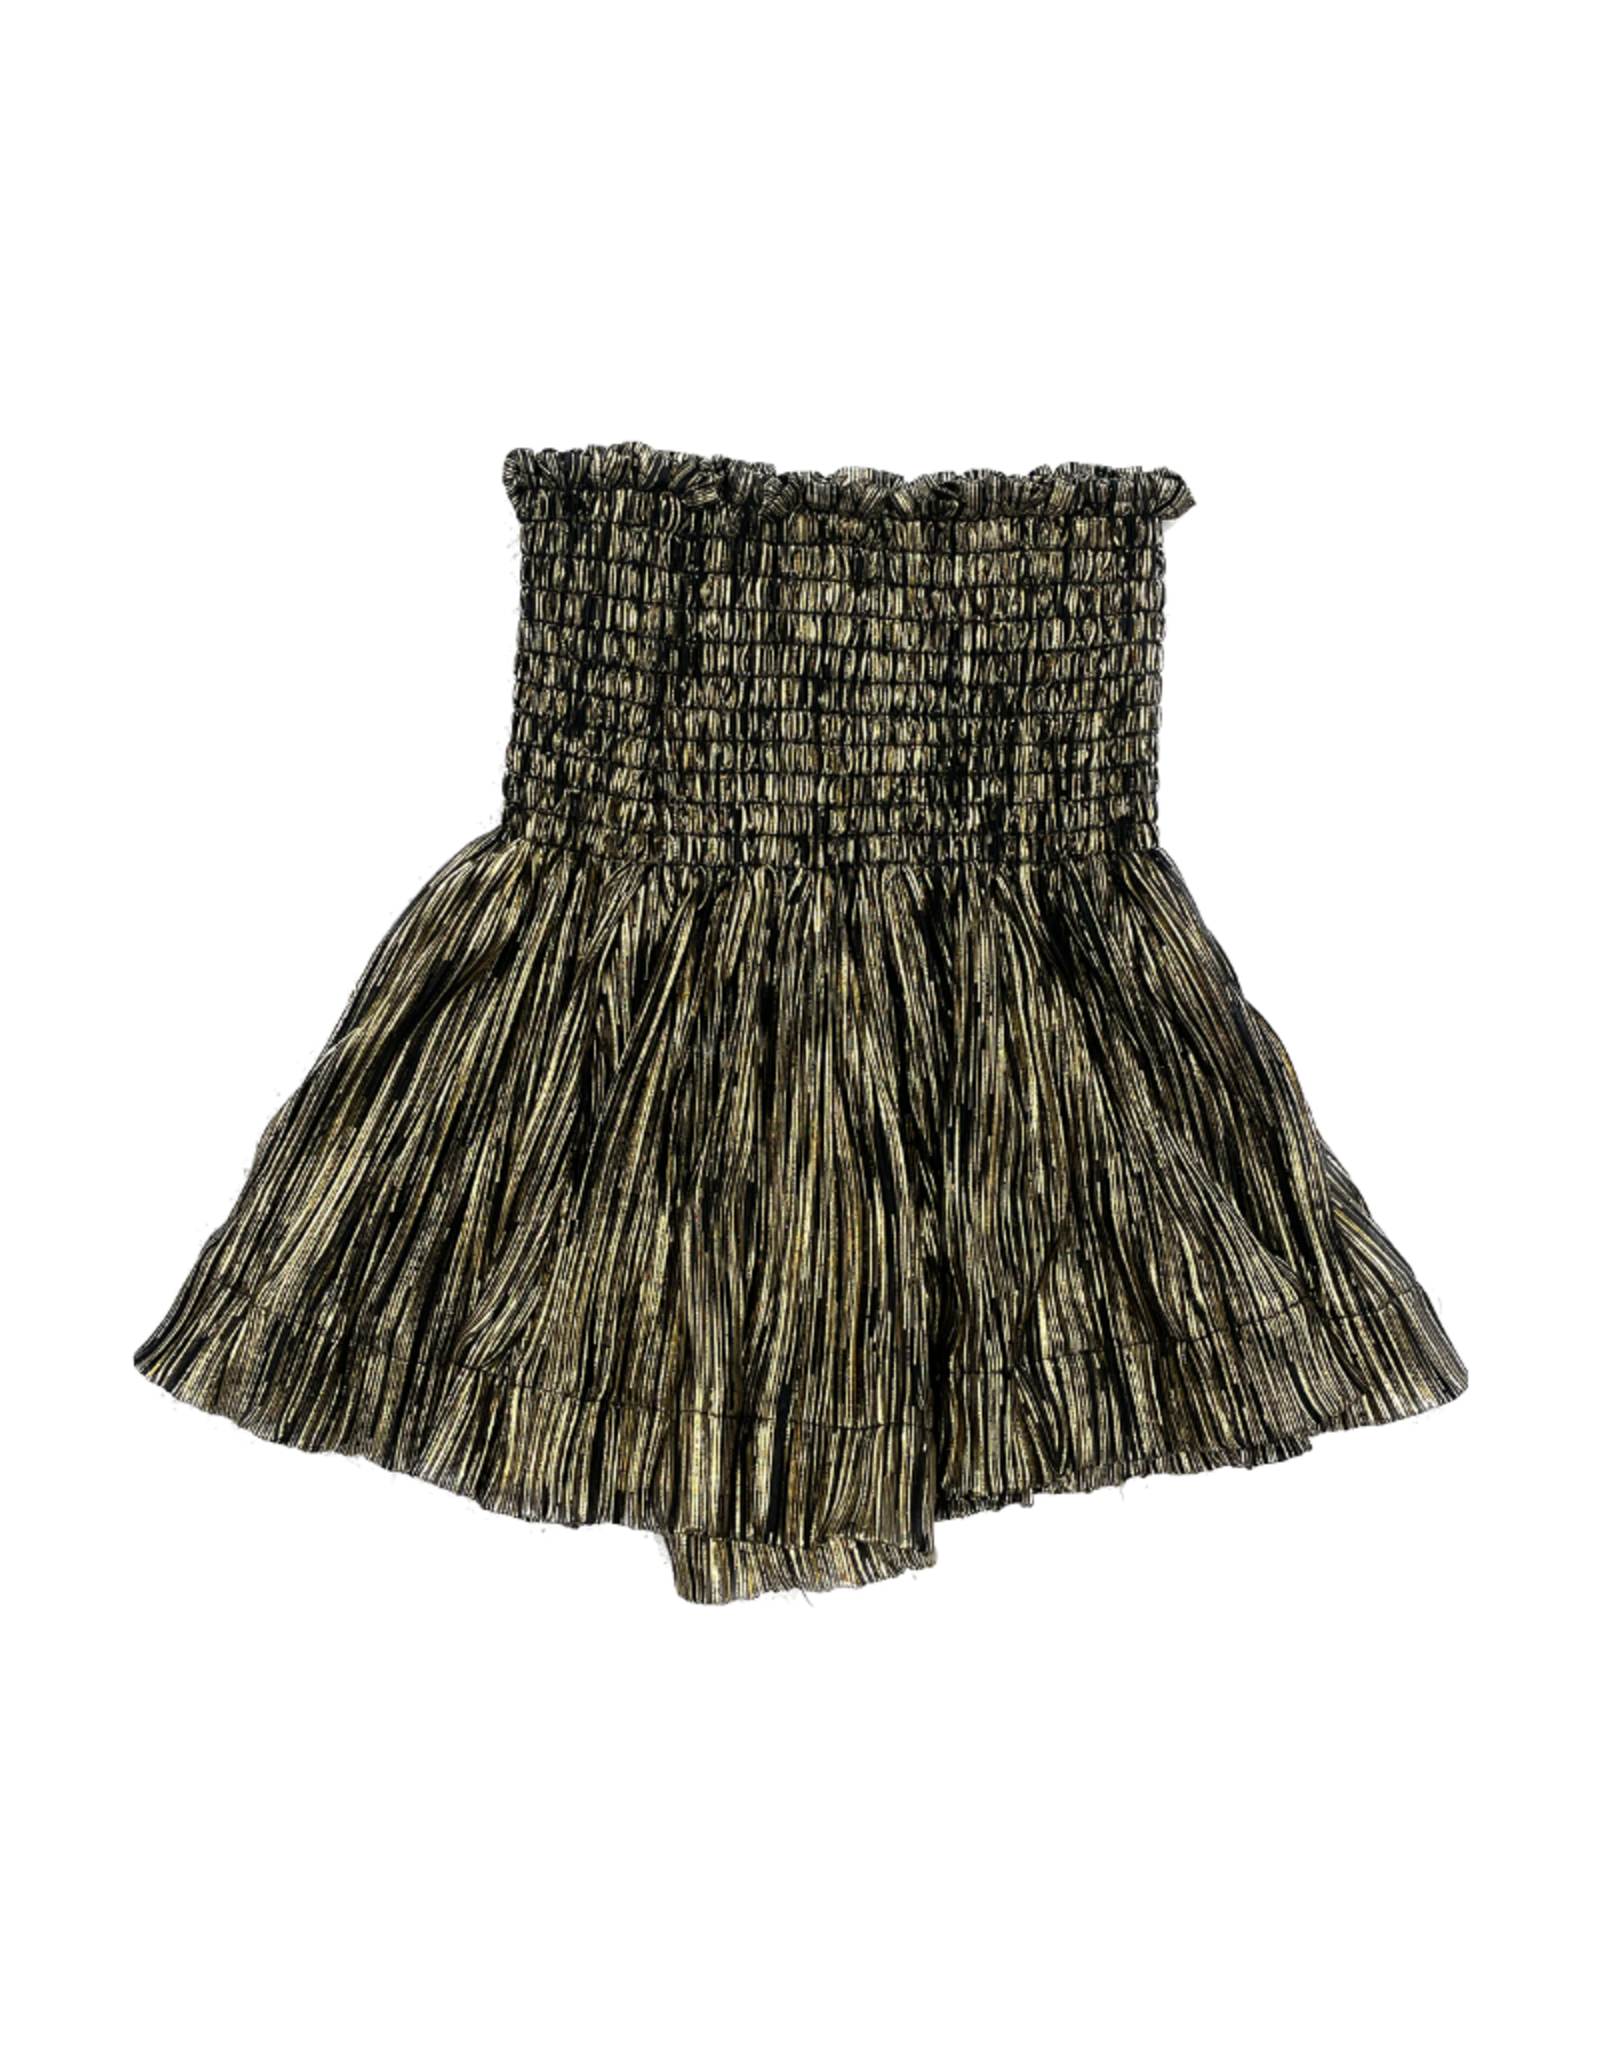 Queen of Sparkles Black/Gold Pleated Swing Shorts